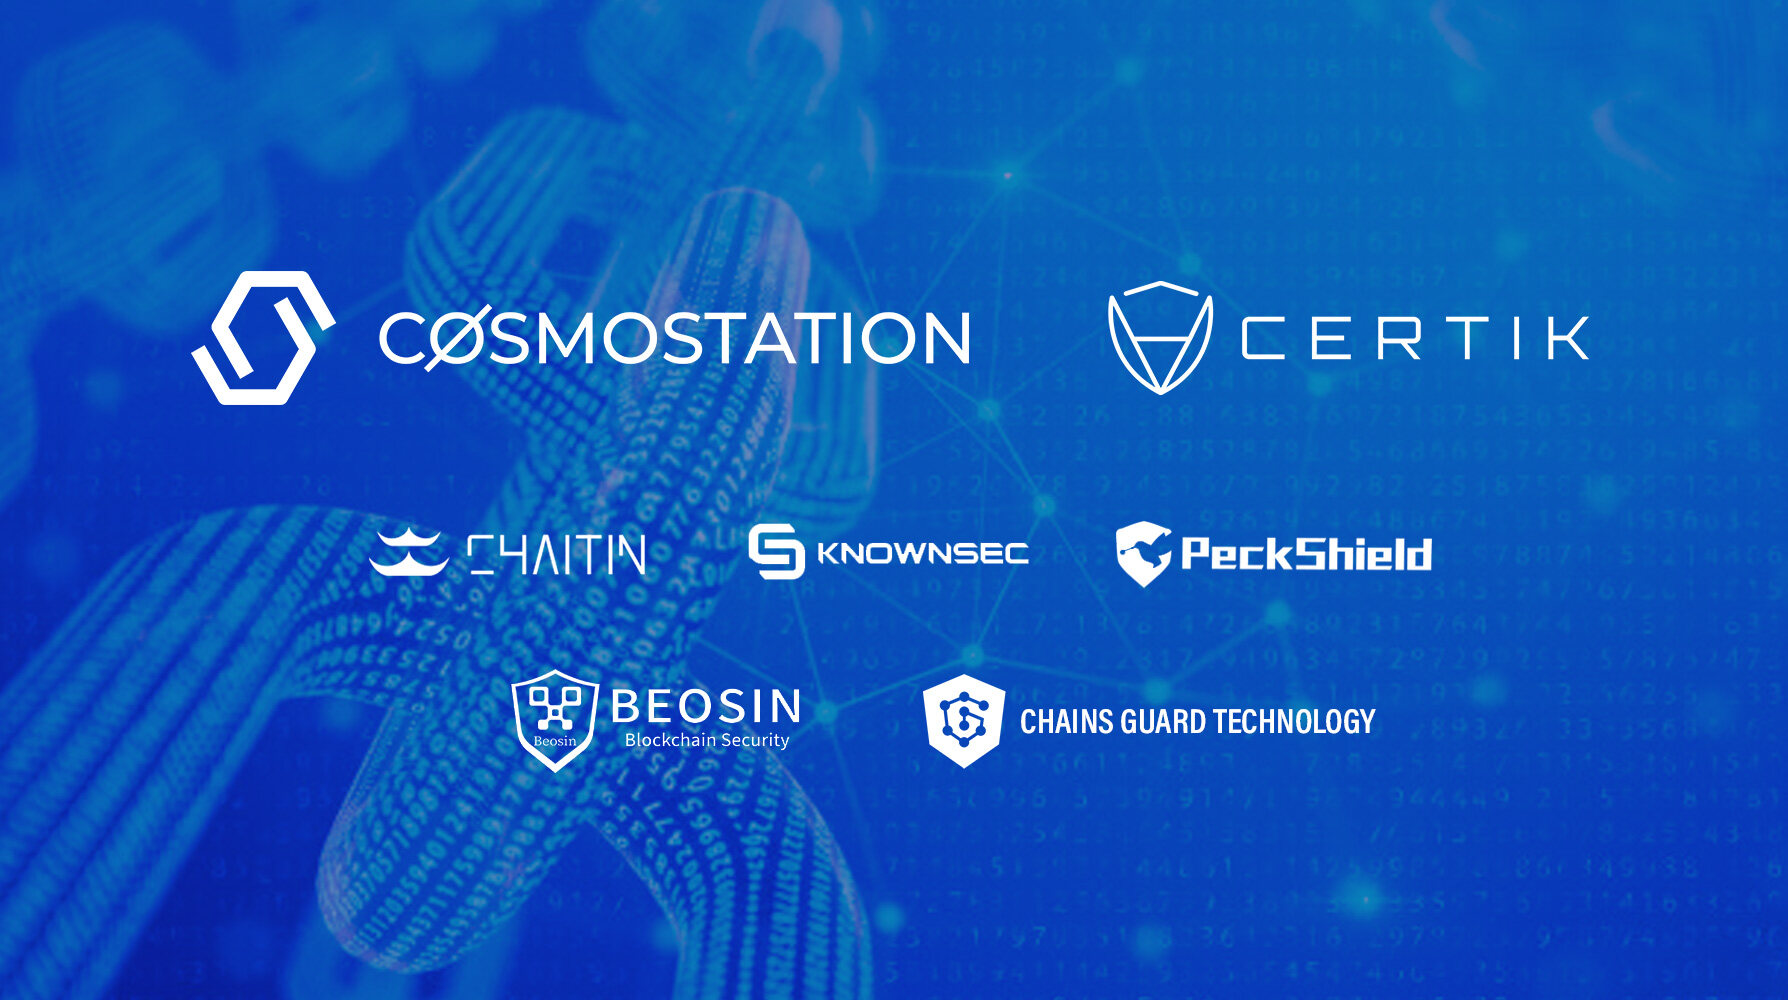 OKC welcomes Cosmostation validator node operator among six other partners to its rapidly expanding ecosystem